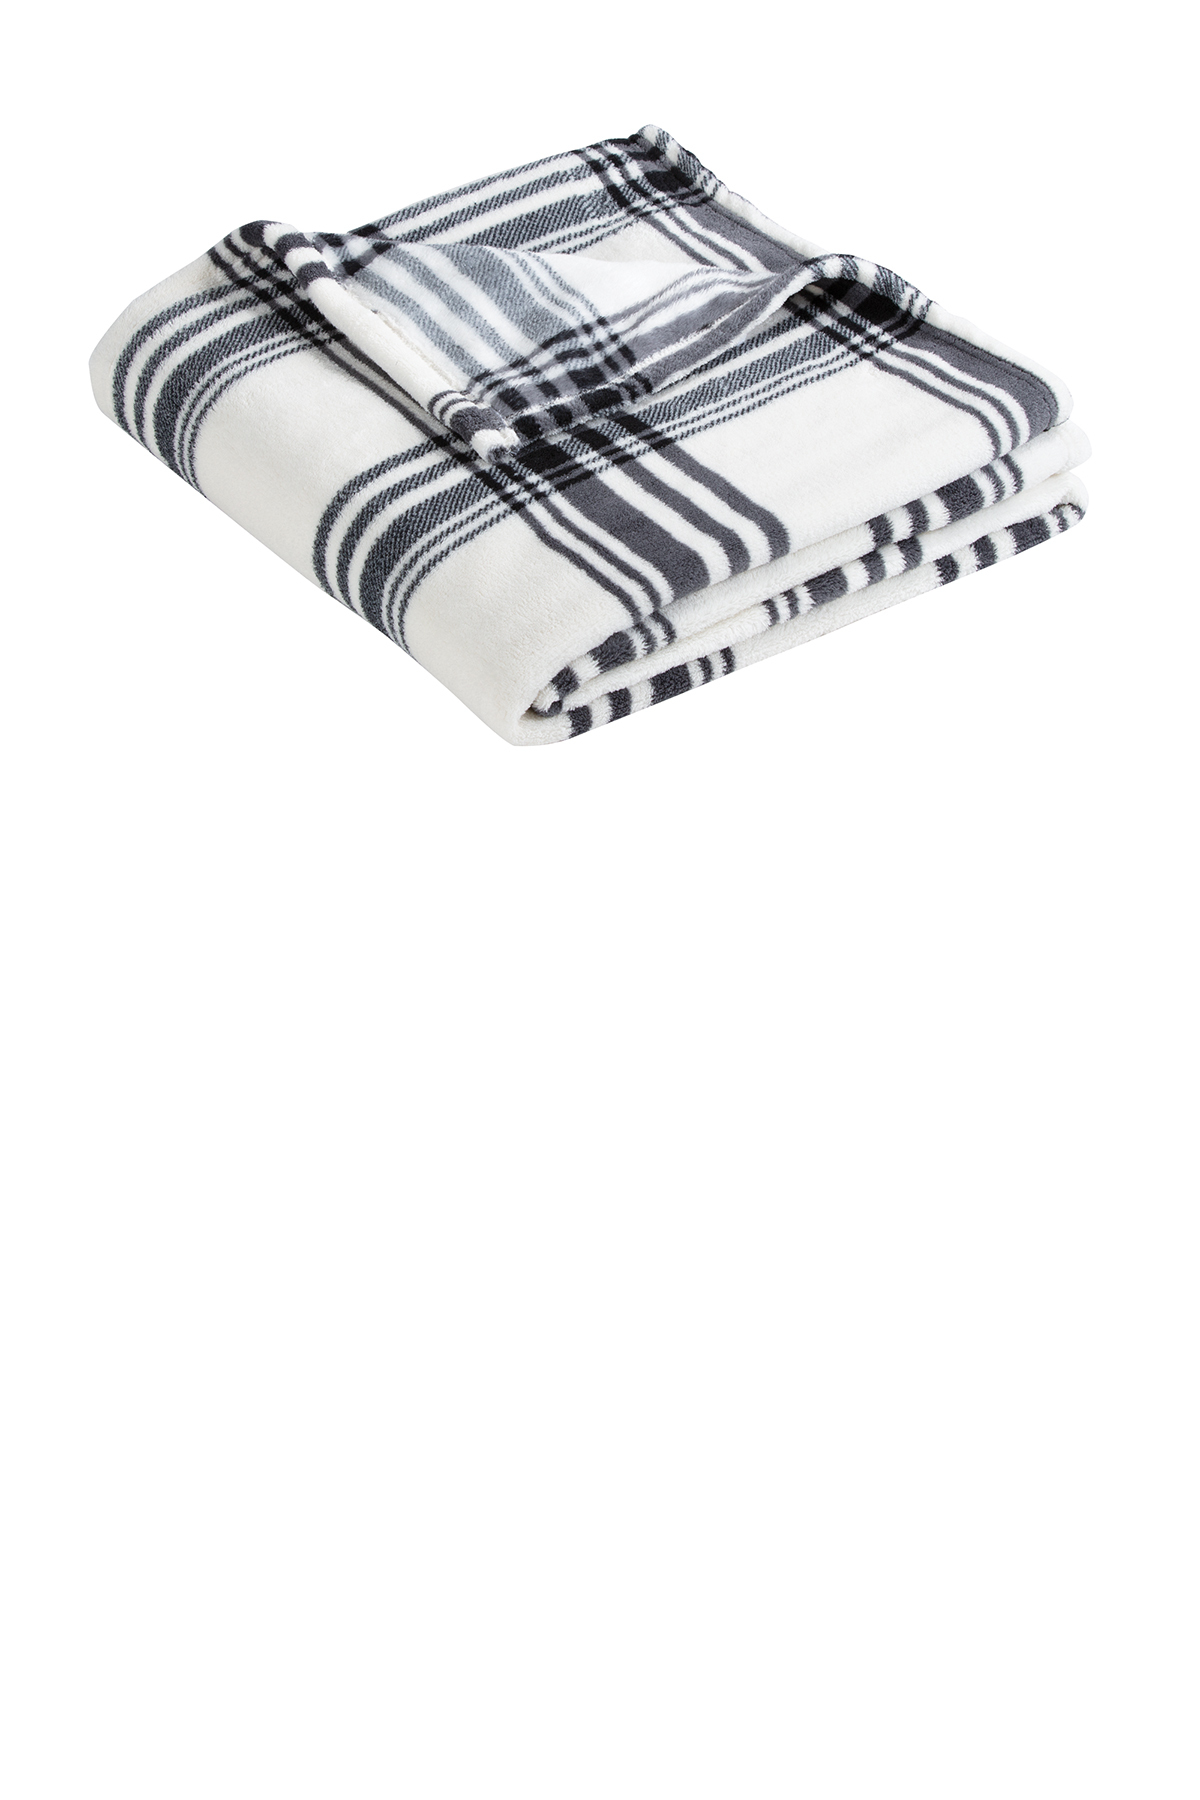 CozeCube Checkered Blanket, Ultra Soft Cozy Black and White Checkered Throw  Blanket, Warm Fluffy Checkerboard Throw Blanket, Black Checkered Blanket